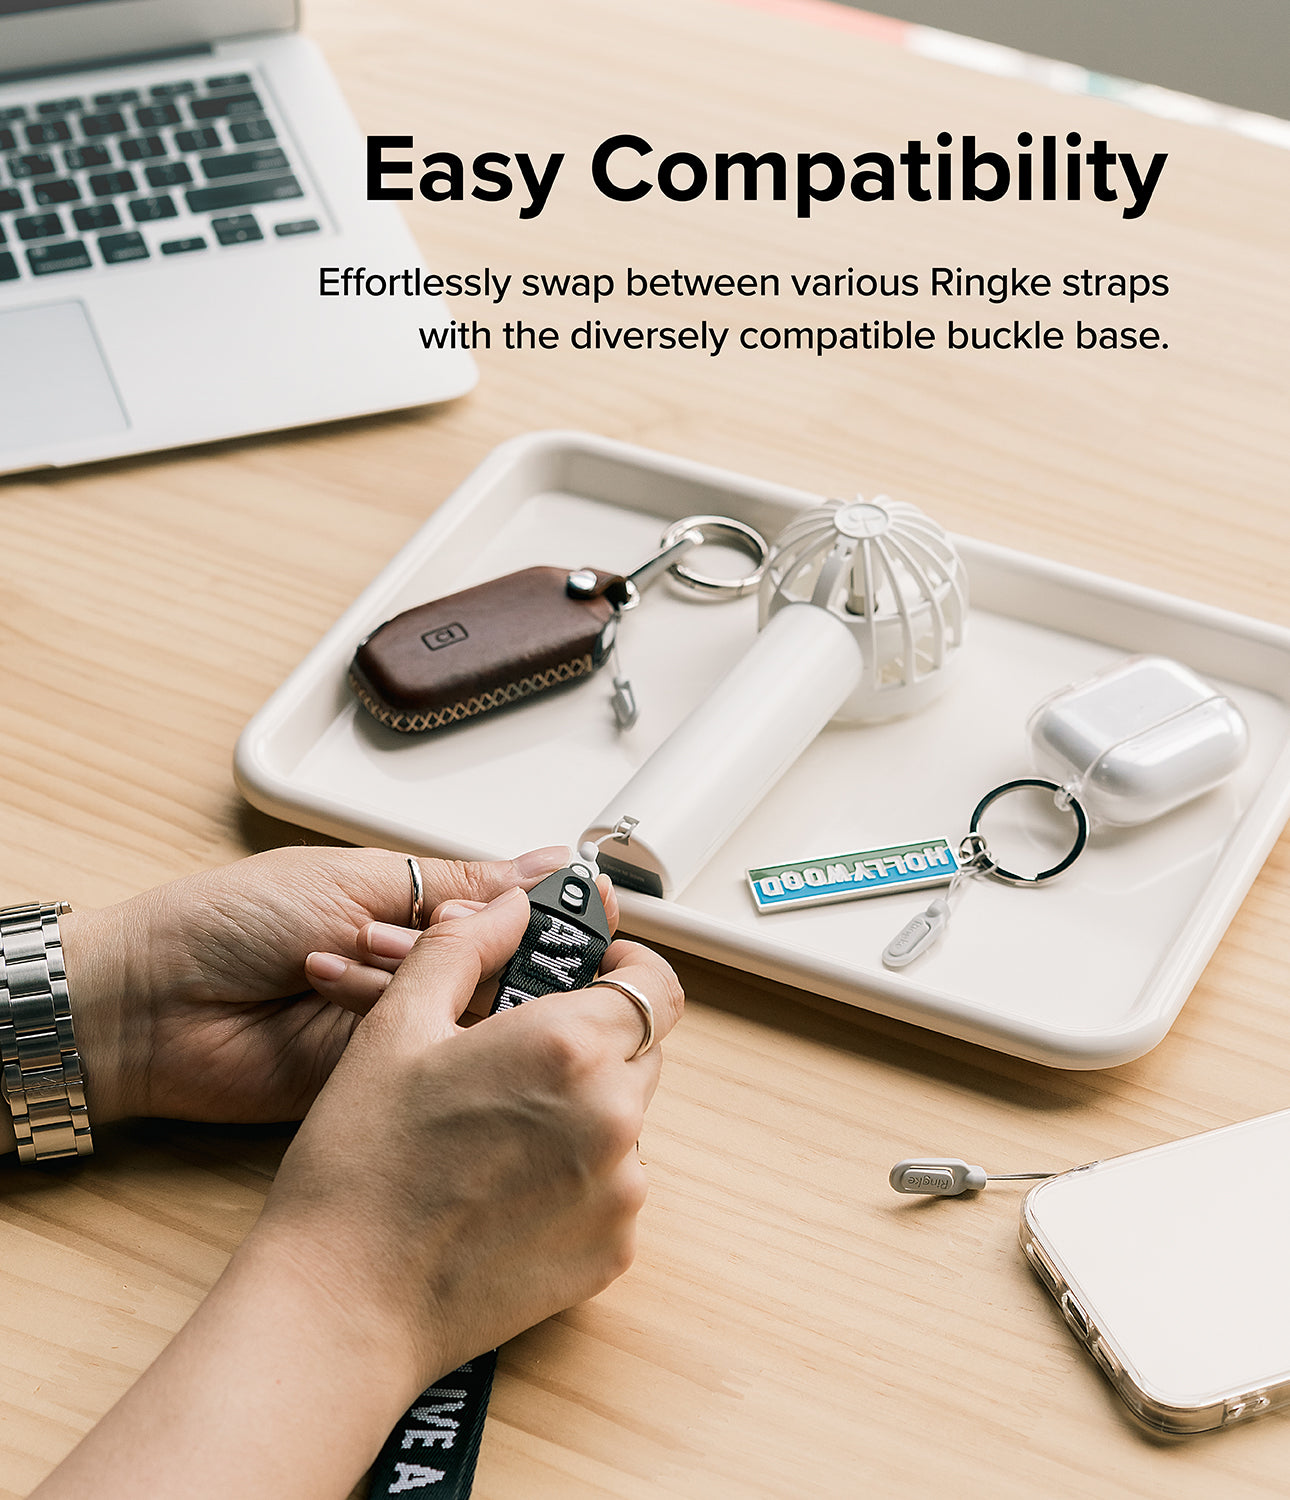 Effortlessly swap between various Ringke straps with the diversely compatible buckle base